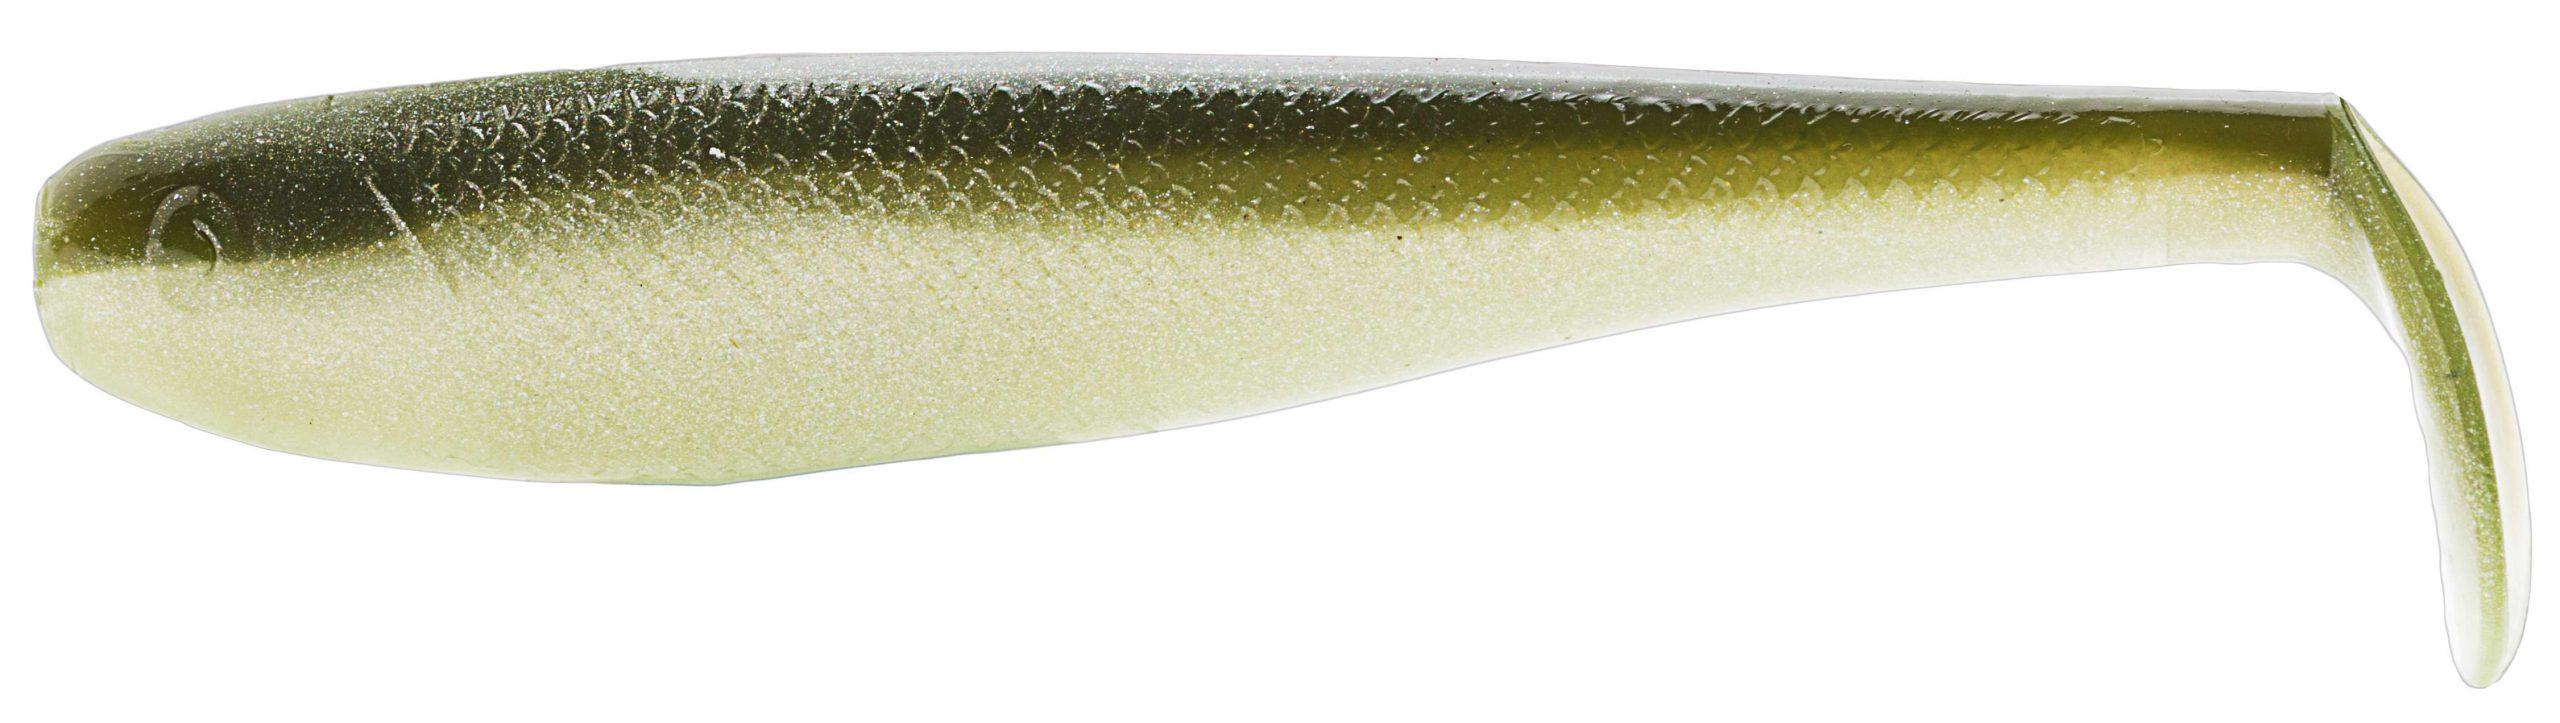 <b>Z-Man</b><br>	SwimmerZ<br>	A new 4-inch size for Z-Man's swimbait, and a new color scheme to match their most popular swimbait hues. By our count, there's 17 color options, so you'll probably find one you like. Also features molded-in eyes and a split-body design for easy rigging. 